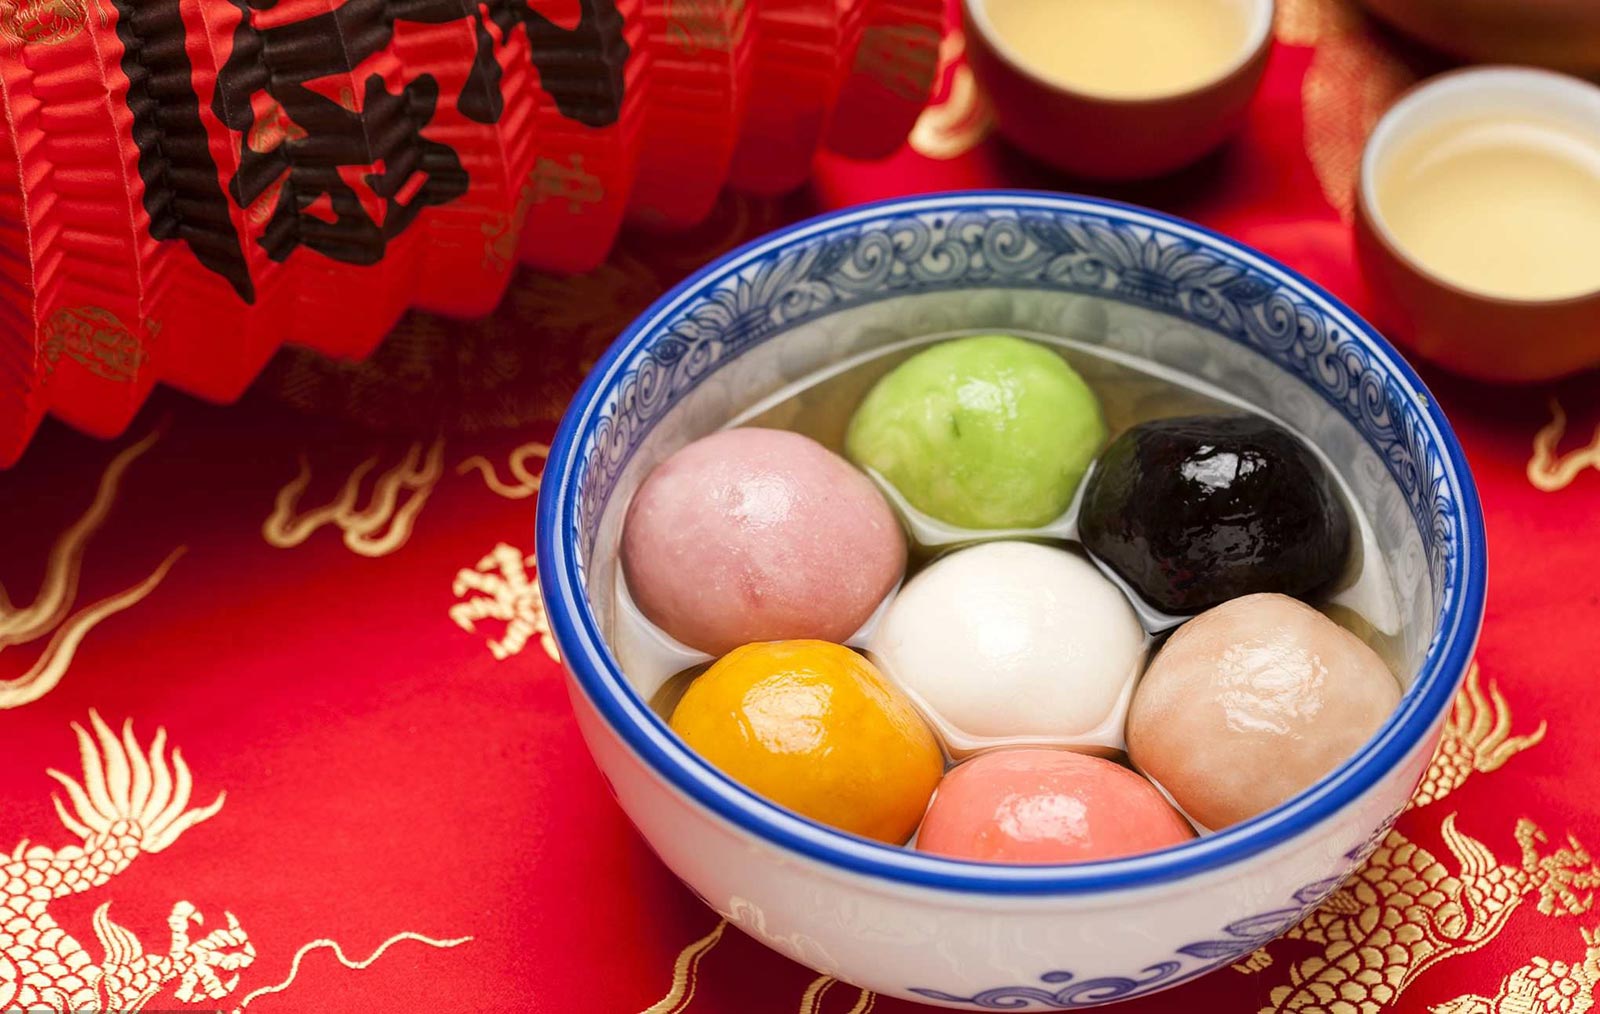 Grab Some Treats at This 🧁 World Dessert Buffet 🥮 to Find Out How Adventurous You Are Tangyuan (Glutinous Rice Balls)